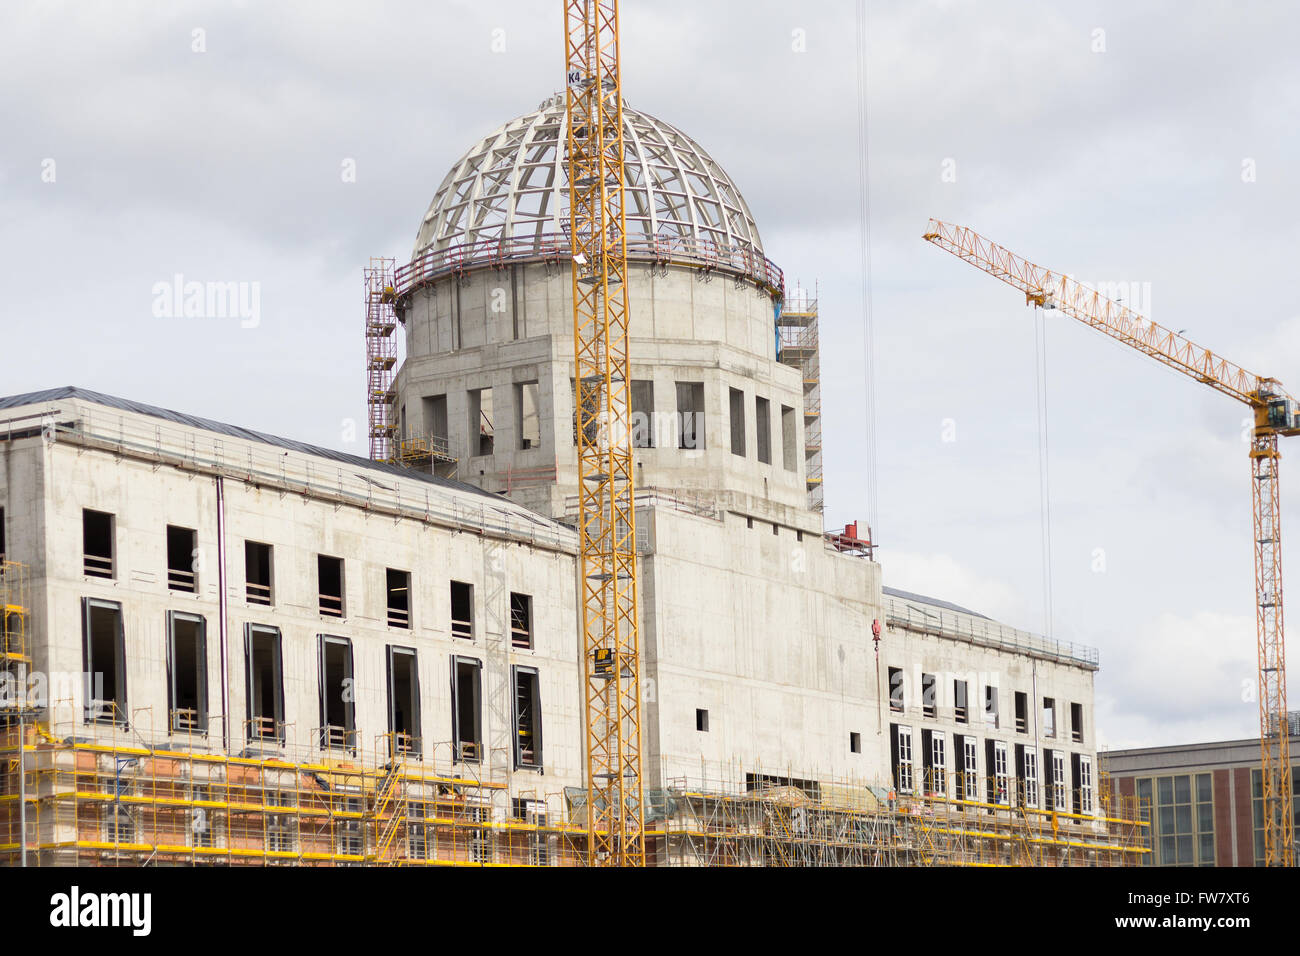 Berlin, Germany - March 30, 2016: Construction site of the reconstruction of the Berlin City Palace (Berliner Stadtschloss) Stock Photo